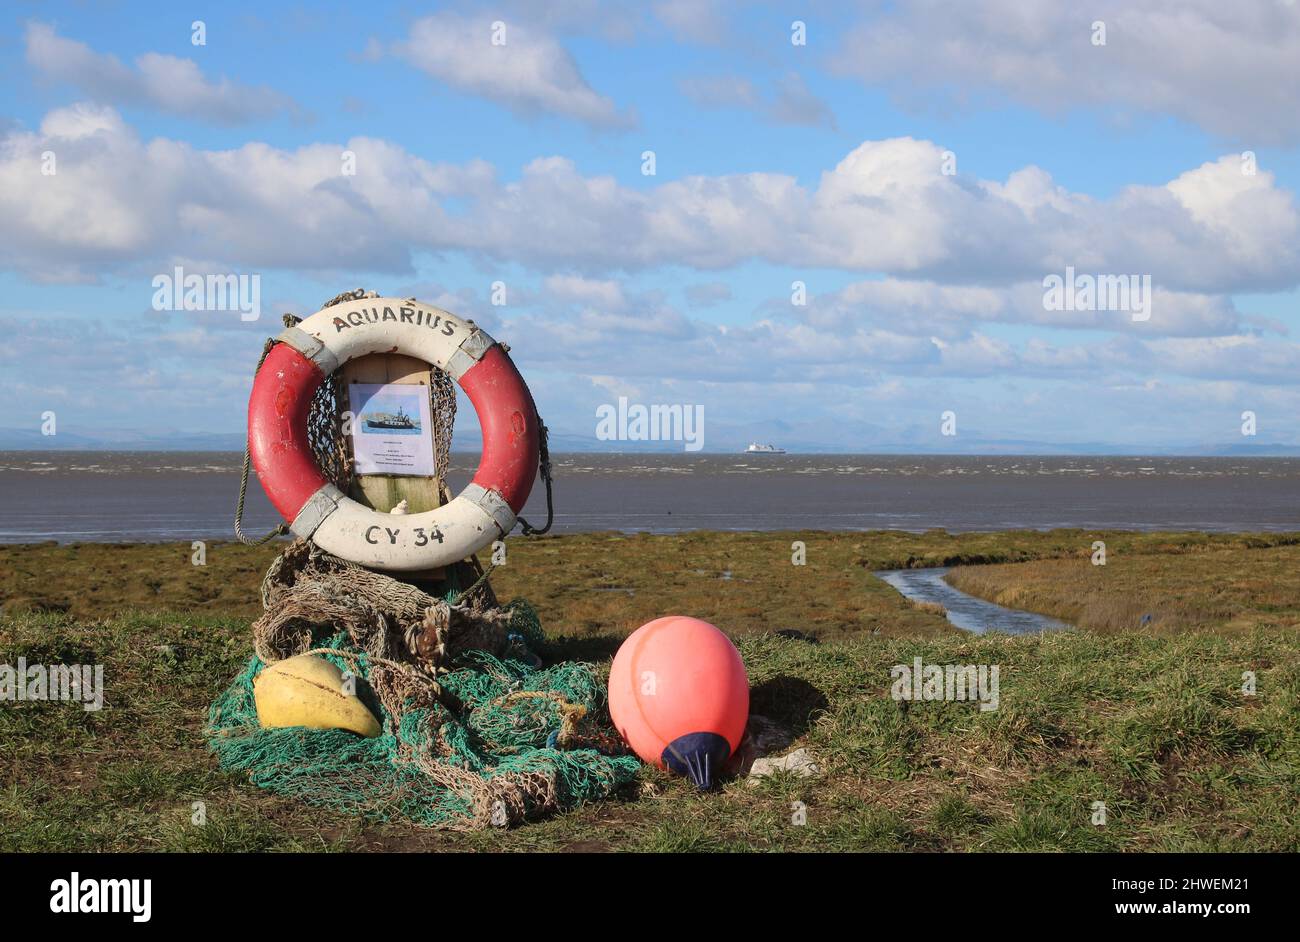 Small collection of assorted objects, lifebelt, buoys, fishing net, information poster on sea wall, Preesall, remembering fishing boat Aquarius CY34. Stock Photo